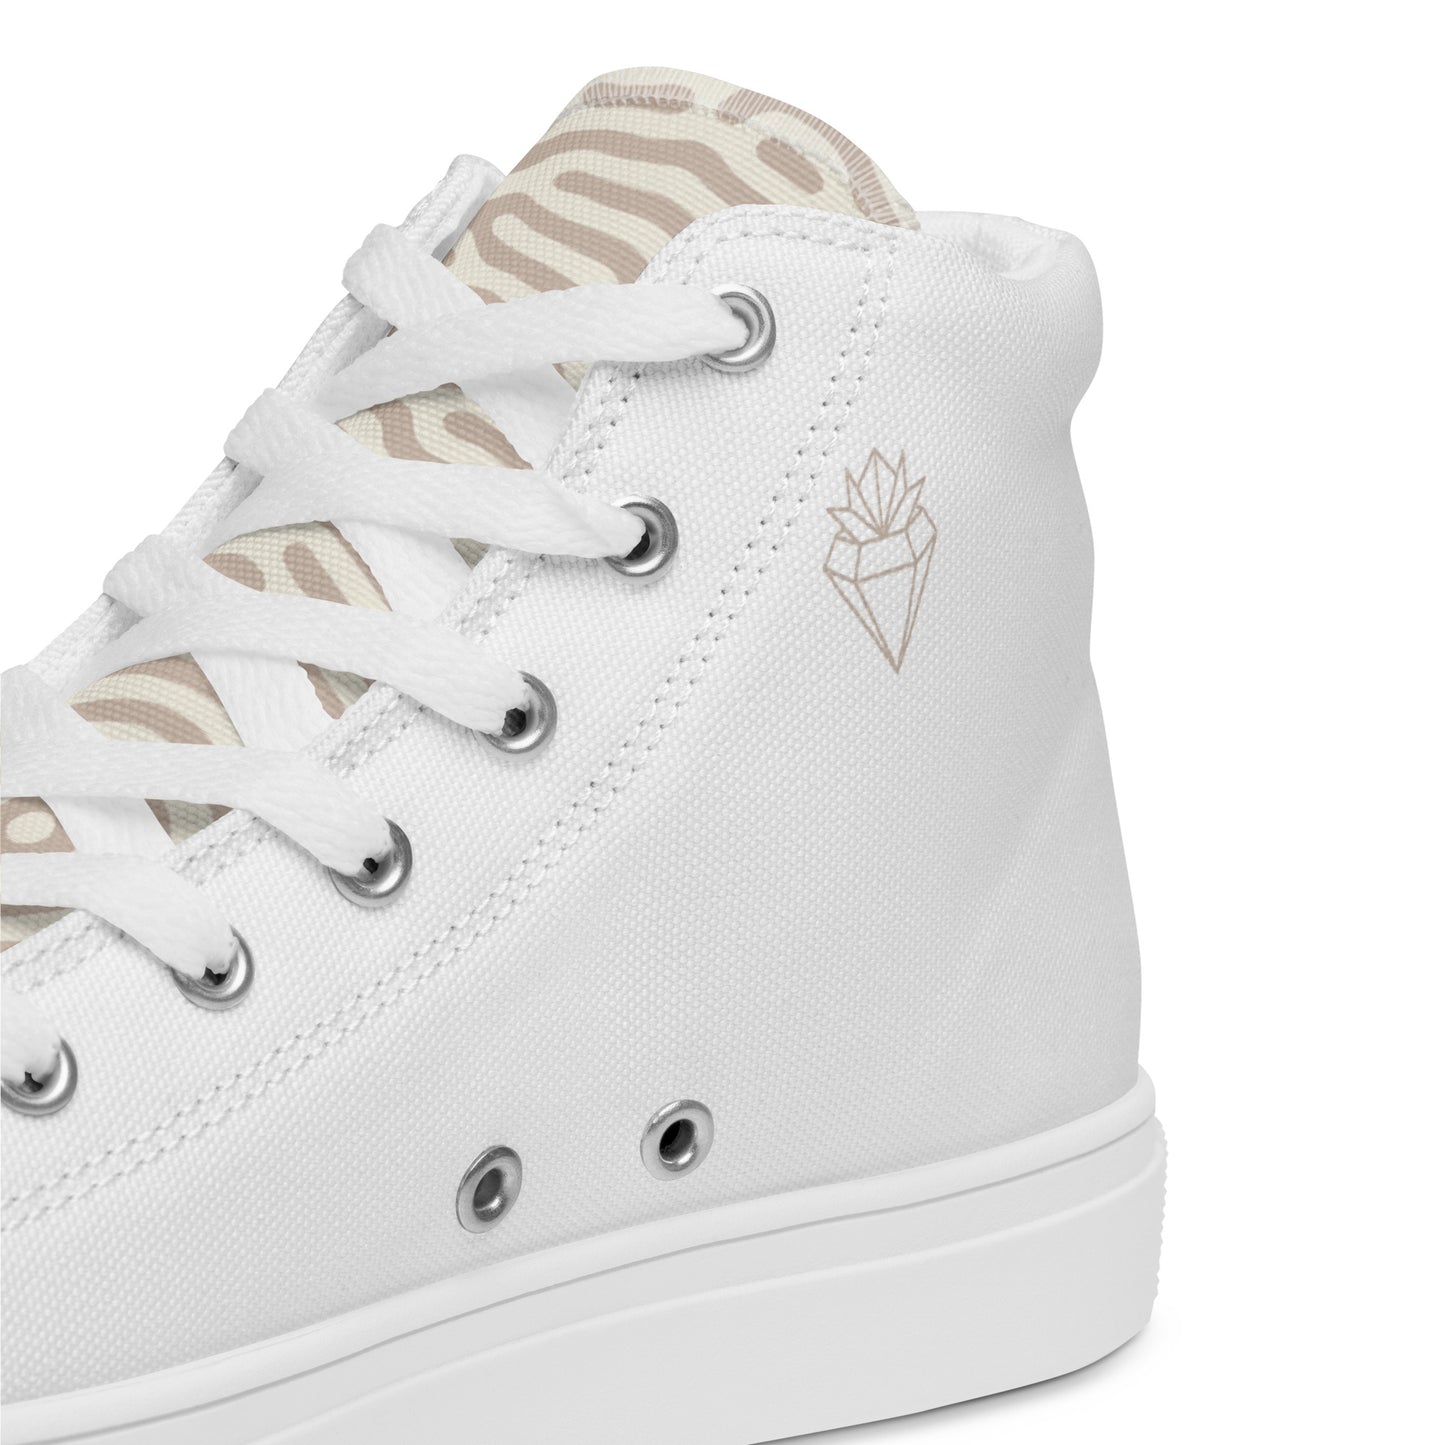 Crowned Diamond Men’s high top canvas shoes